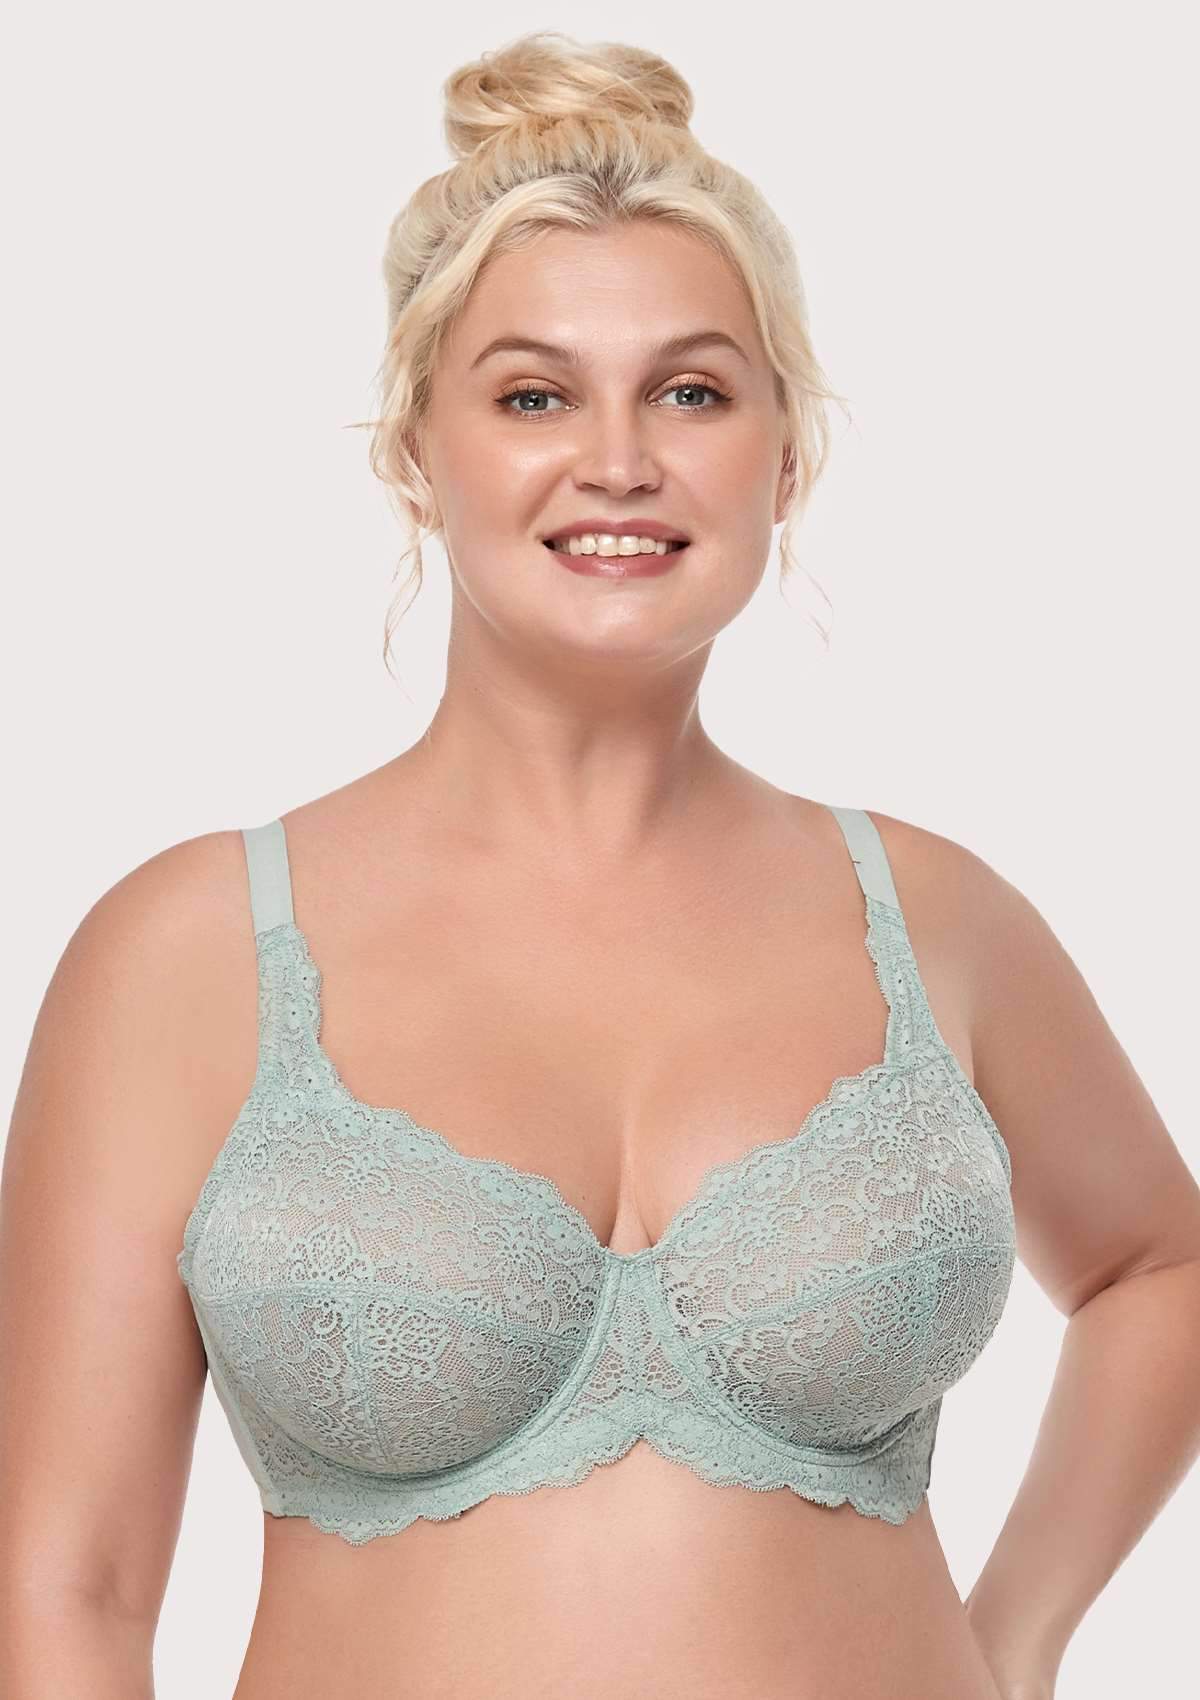 HSIA All-Over Floral Lace: Best Bra For Elderly With Sagging Breasts - Crystal Blue / 40 / DDD/F